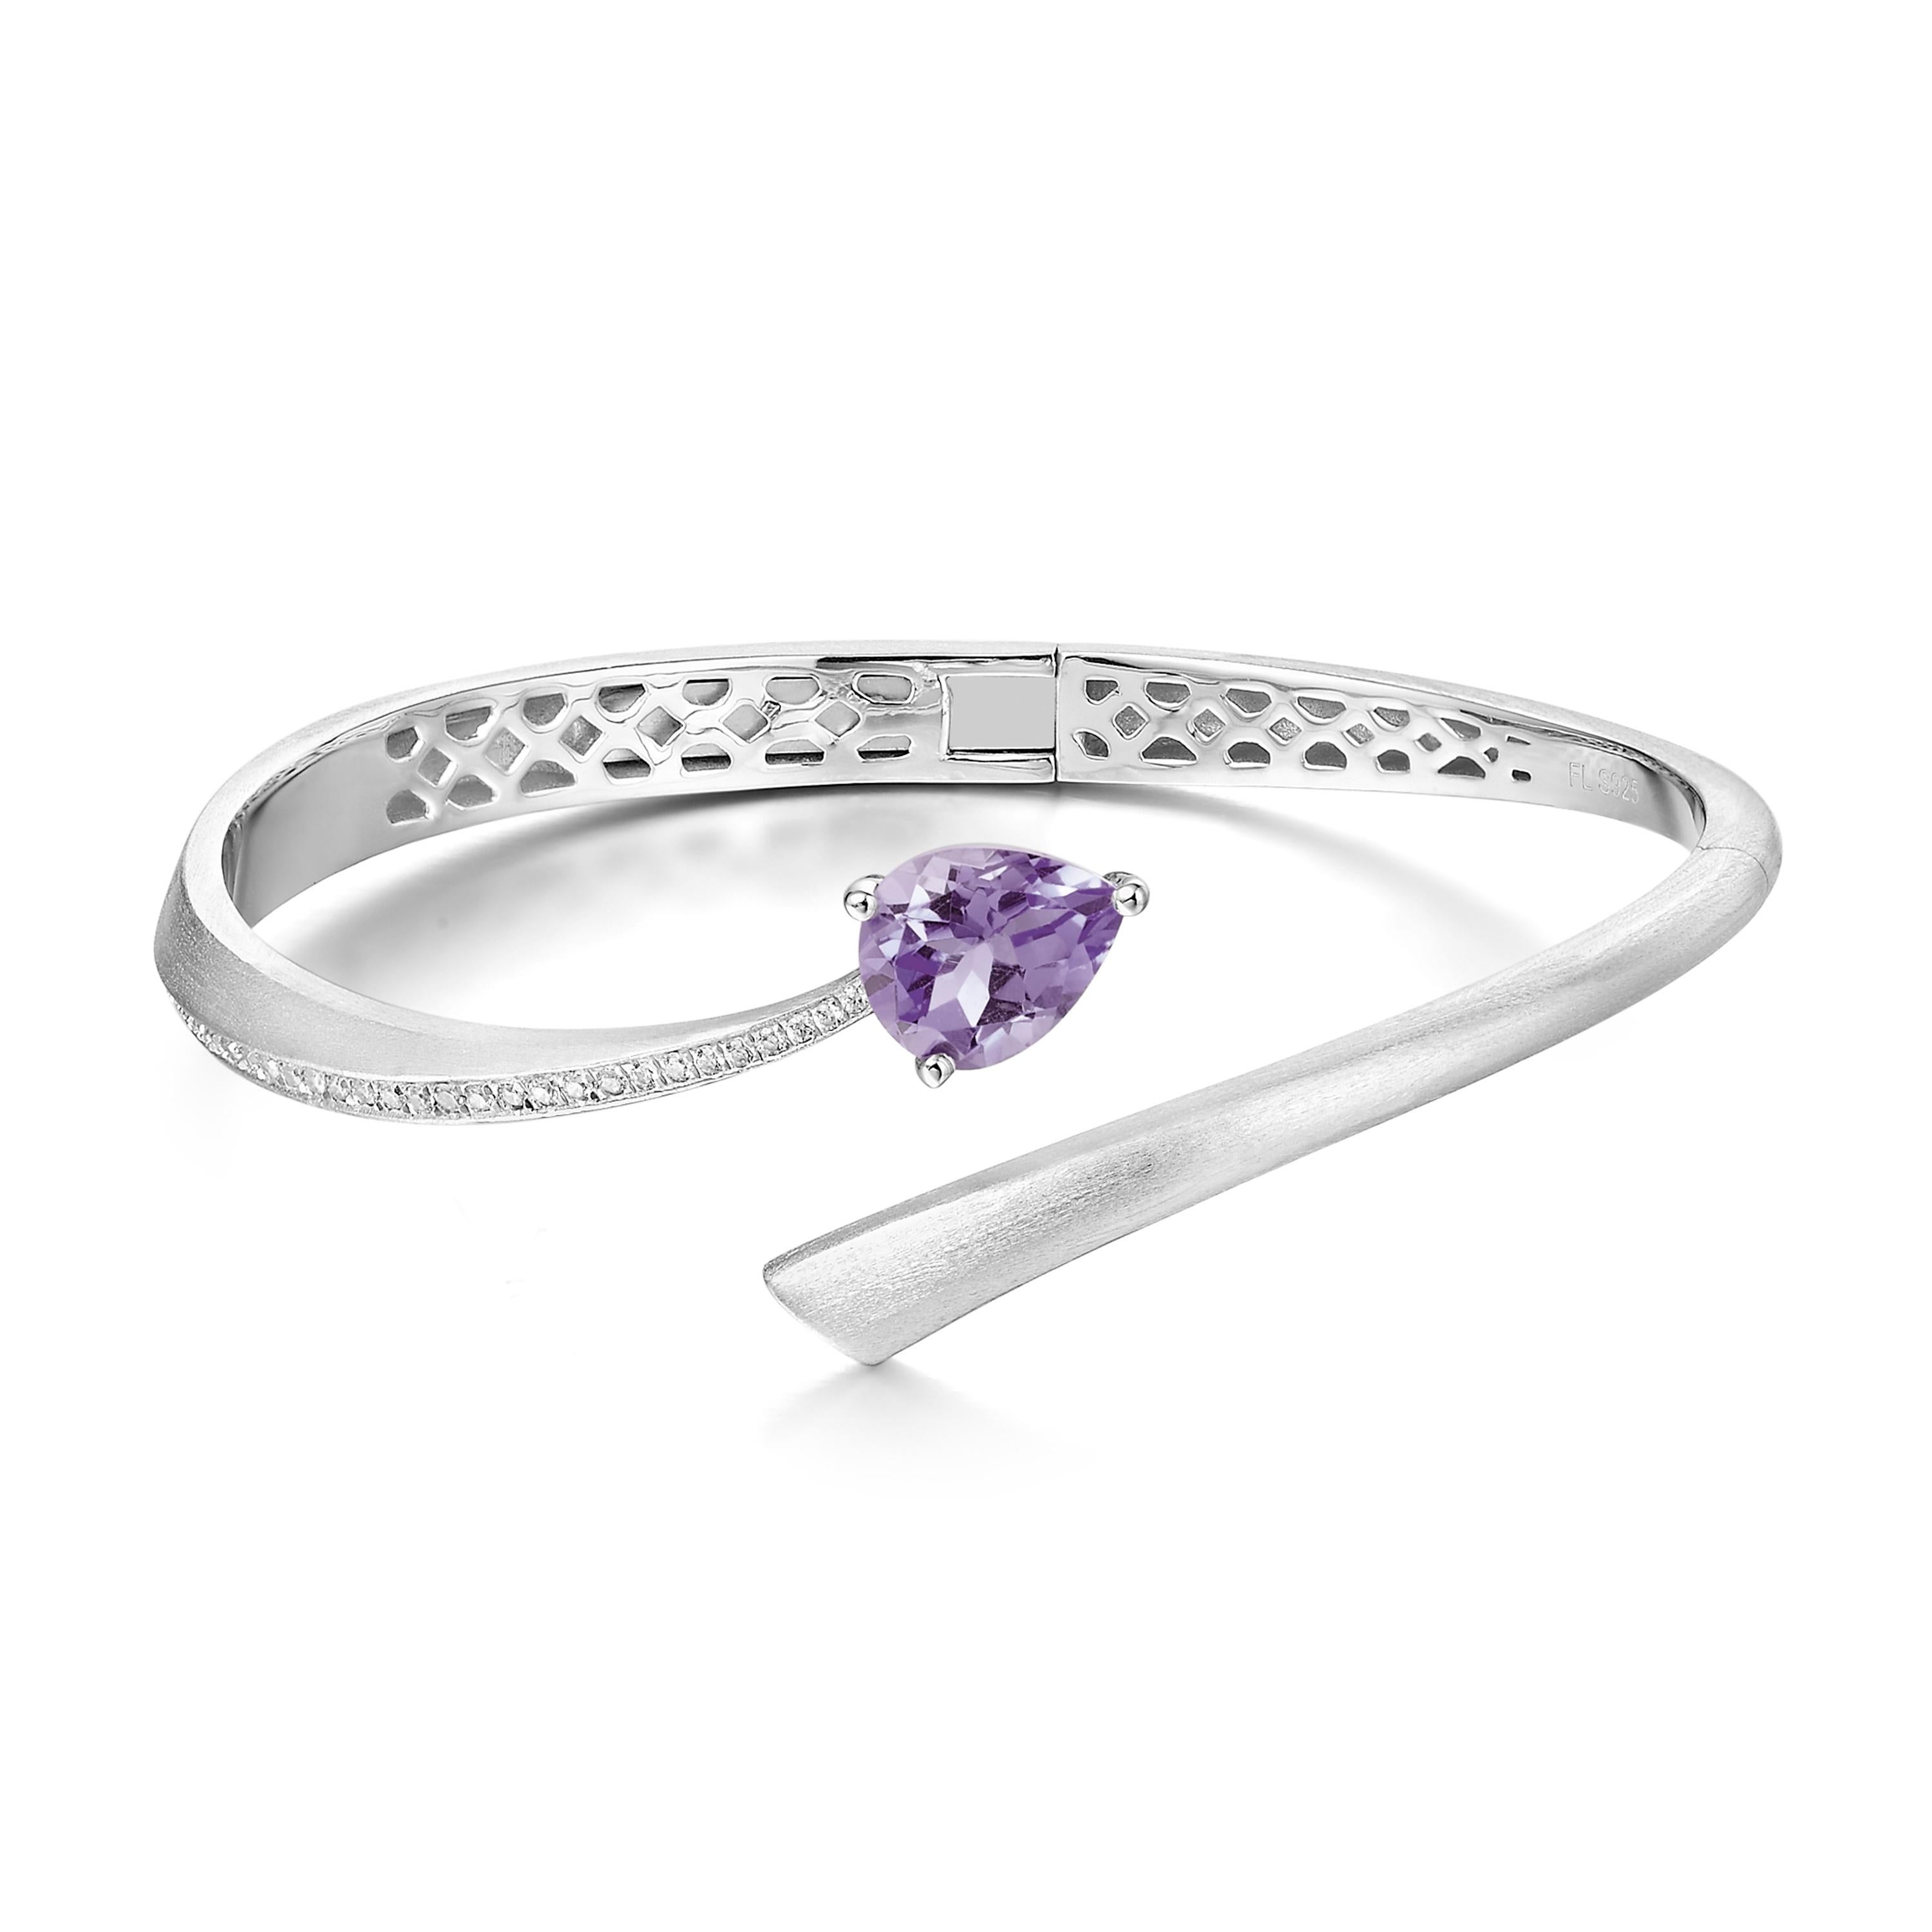 Description:
Shooting Star bangle with pear cut purple amethyst and Hearts and Arrows* white cubic zirconia, set in brushed polished white rhodium on sterling silver.

Inner diameter (LxW): small/medium = 56mm x 60 mm, large = 60mm x 65mm

*Hearts